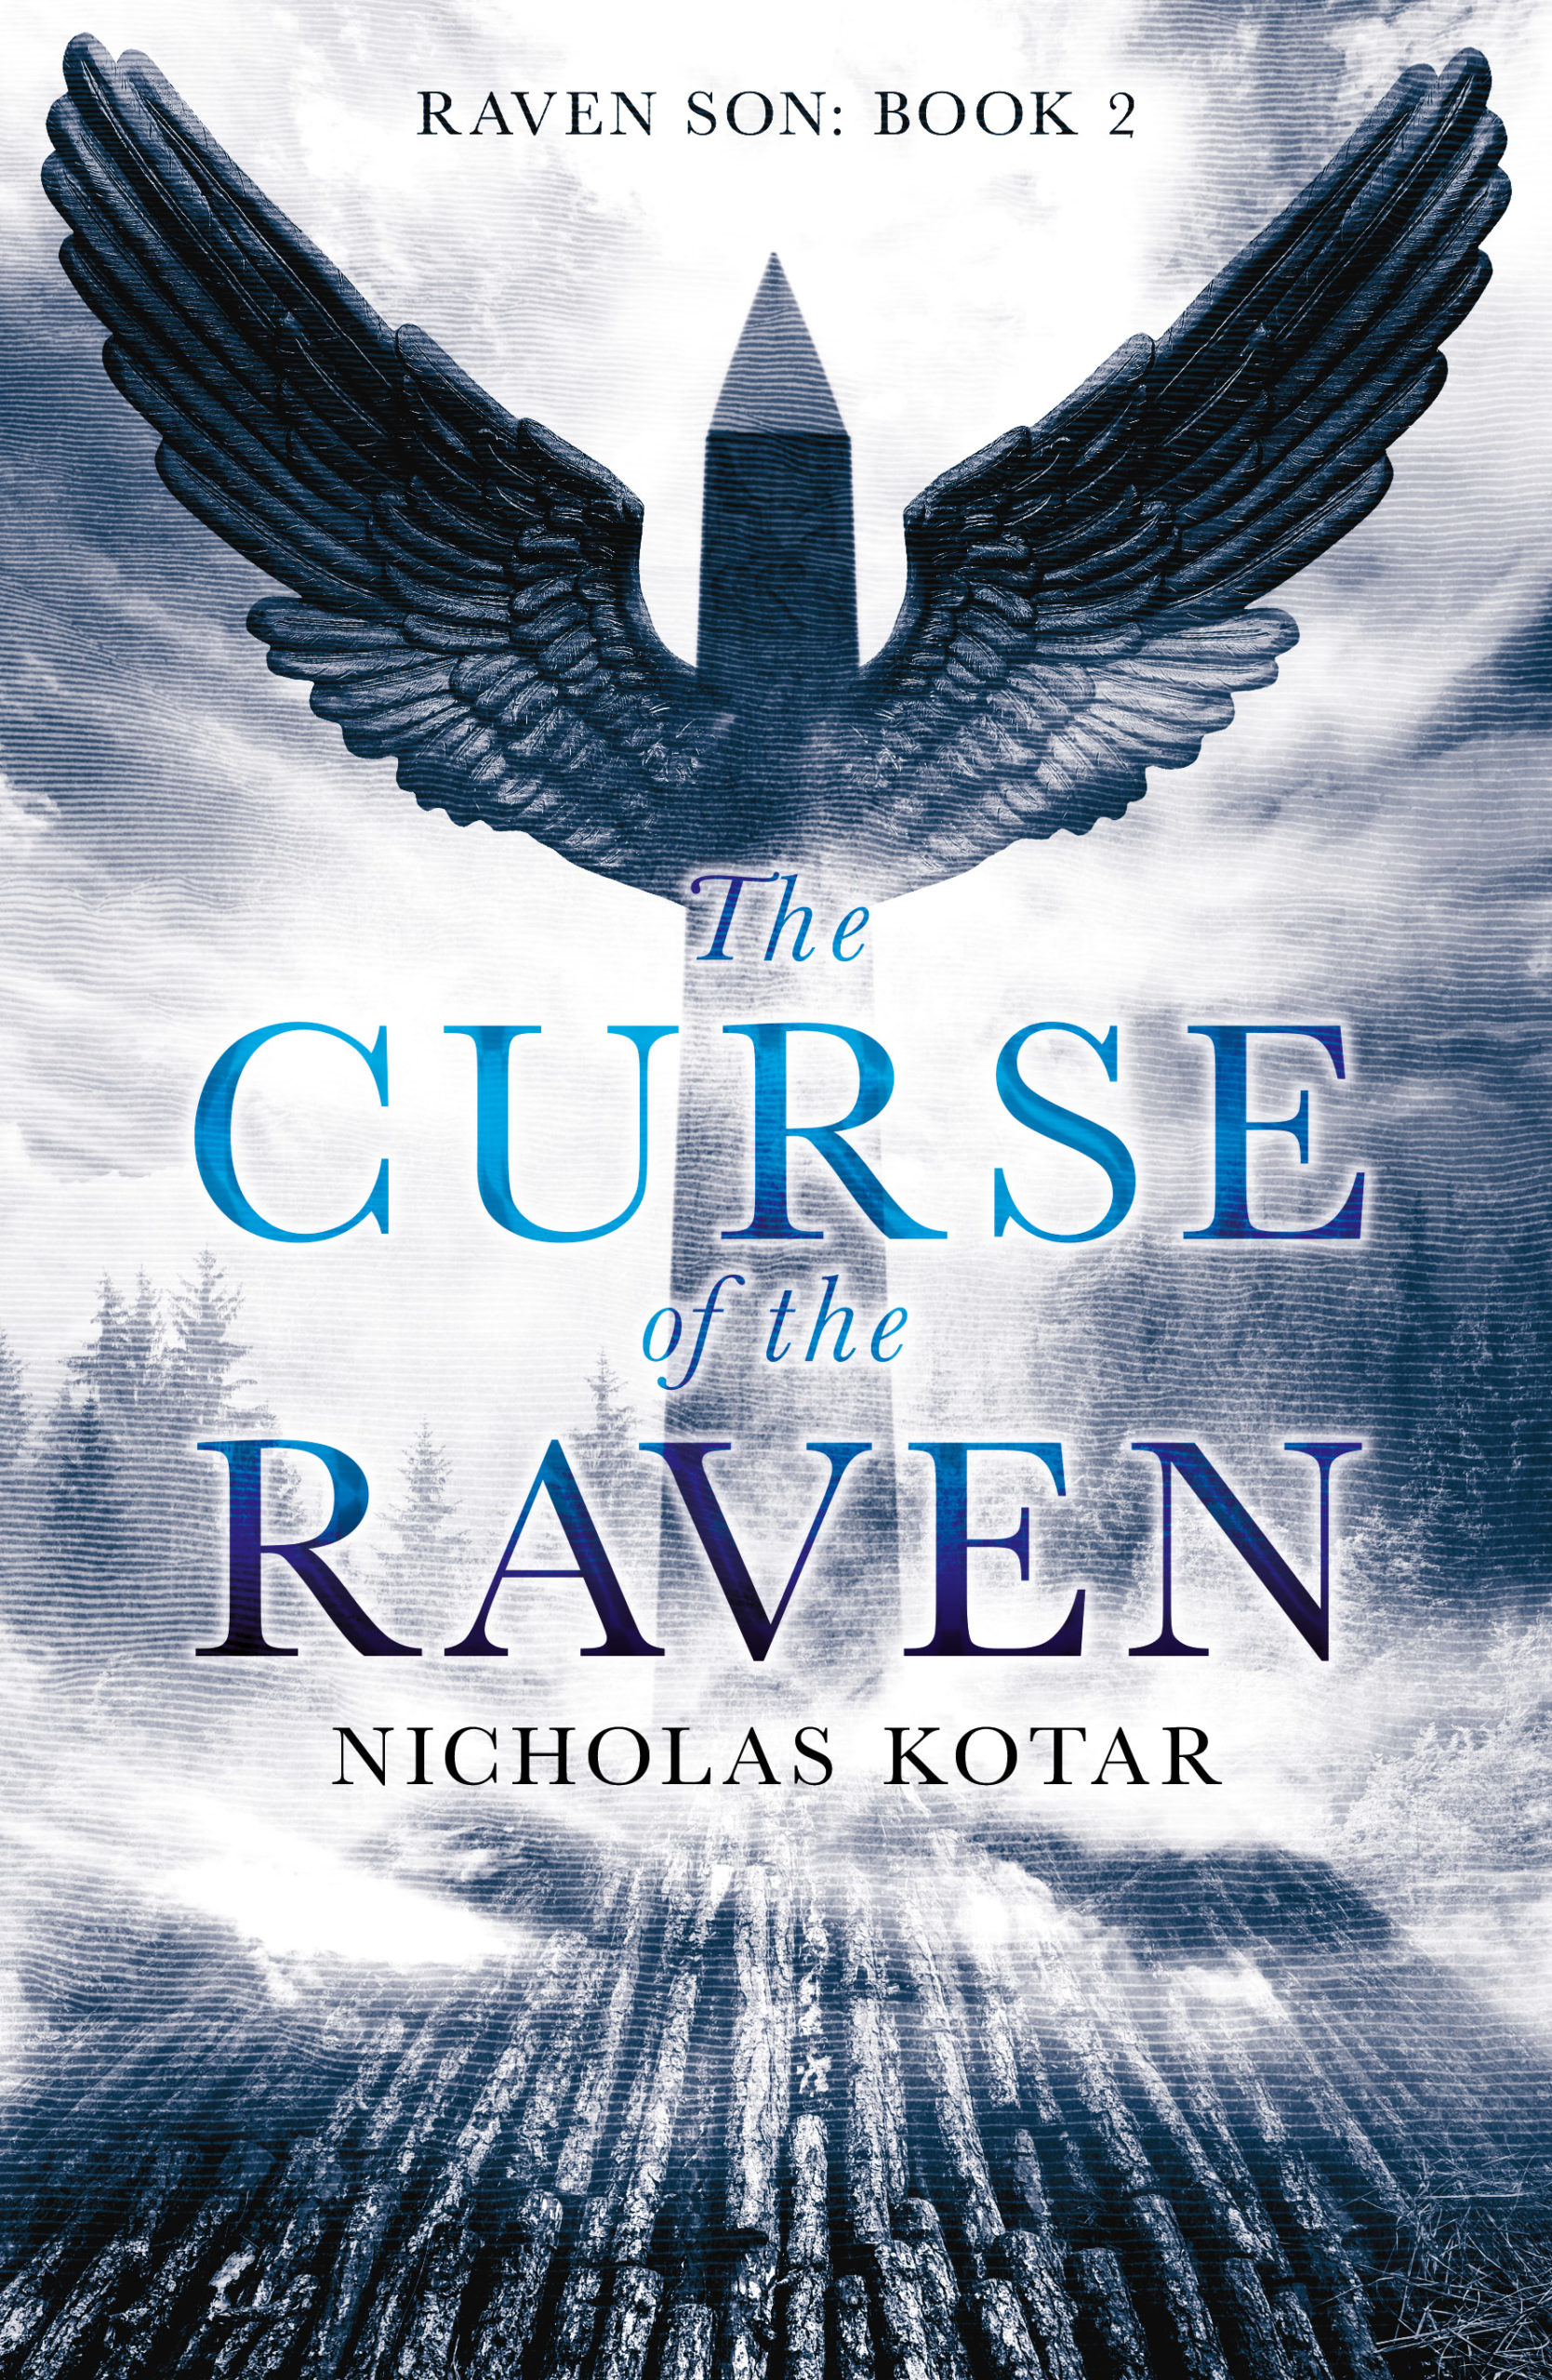 The Curse of the Raven (Raven Son: Book Two)